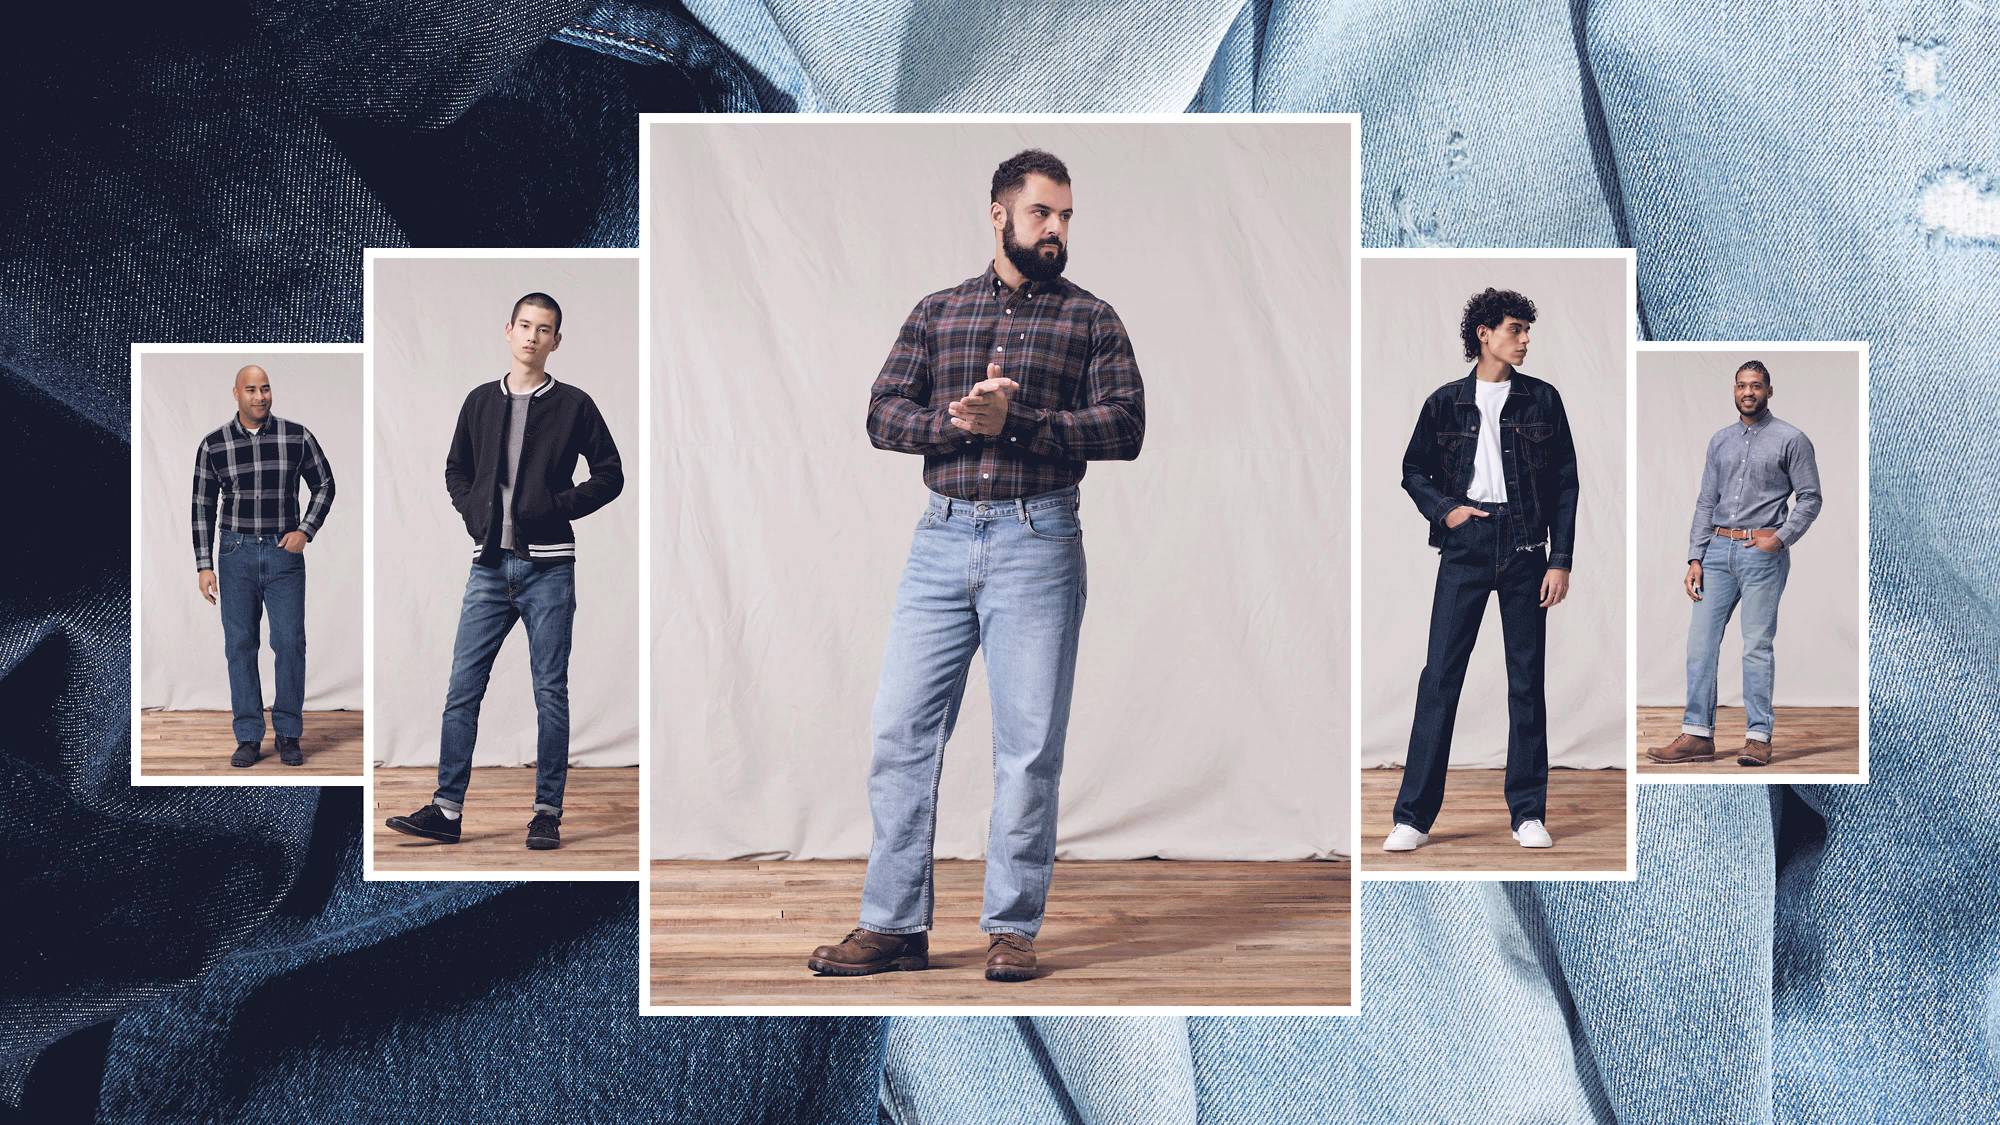 Shop the Best Levi's Jeans Deals on  for as Low as $21